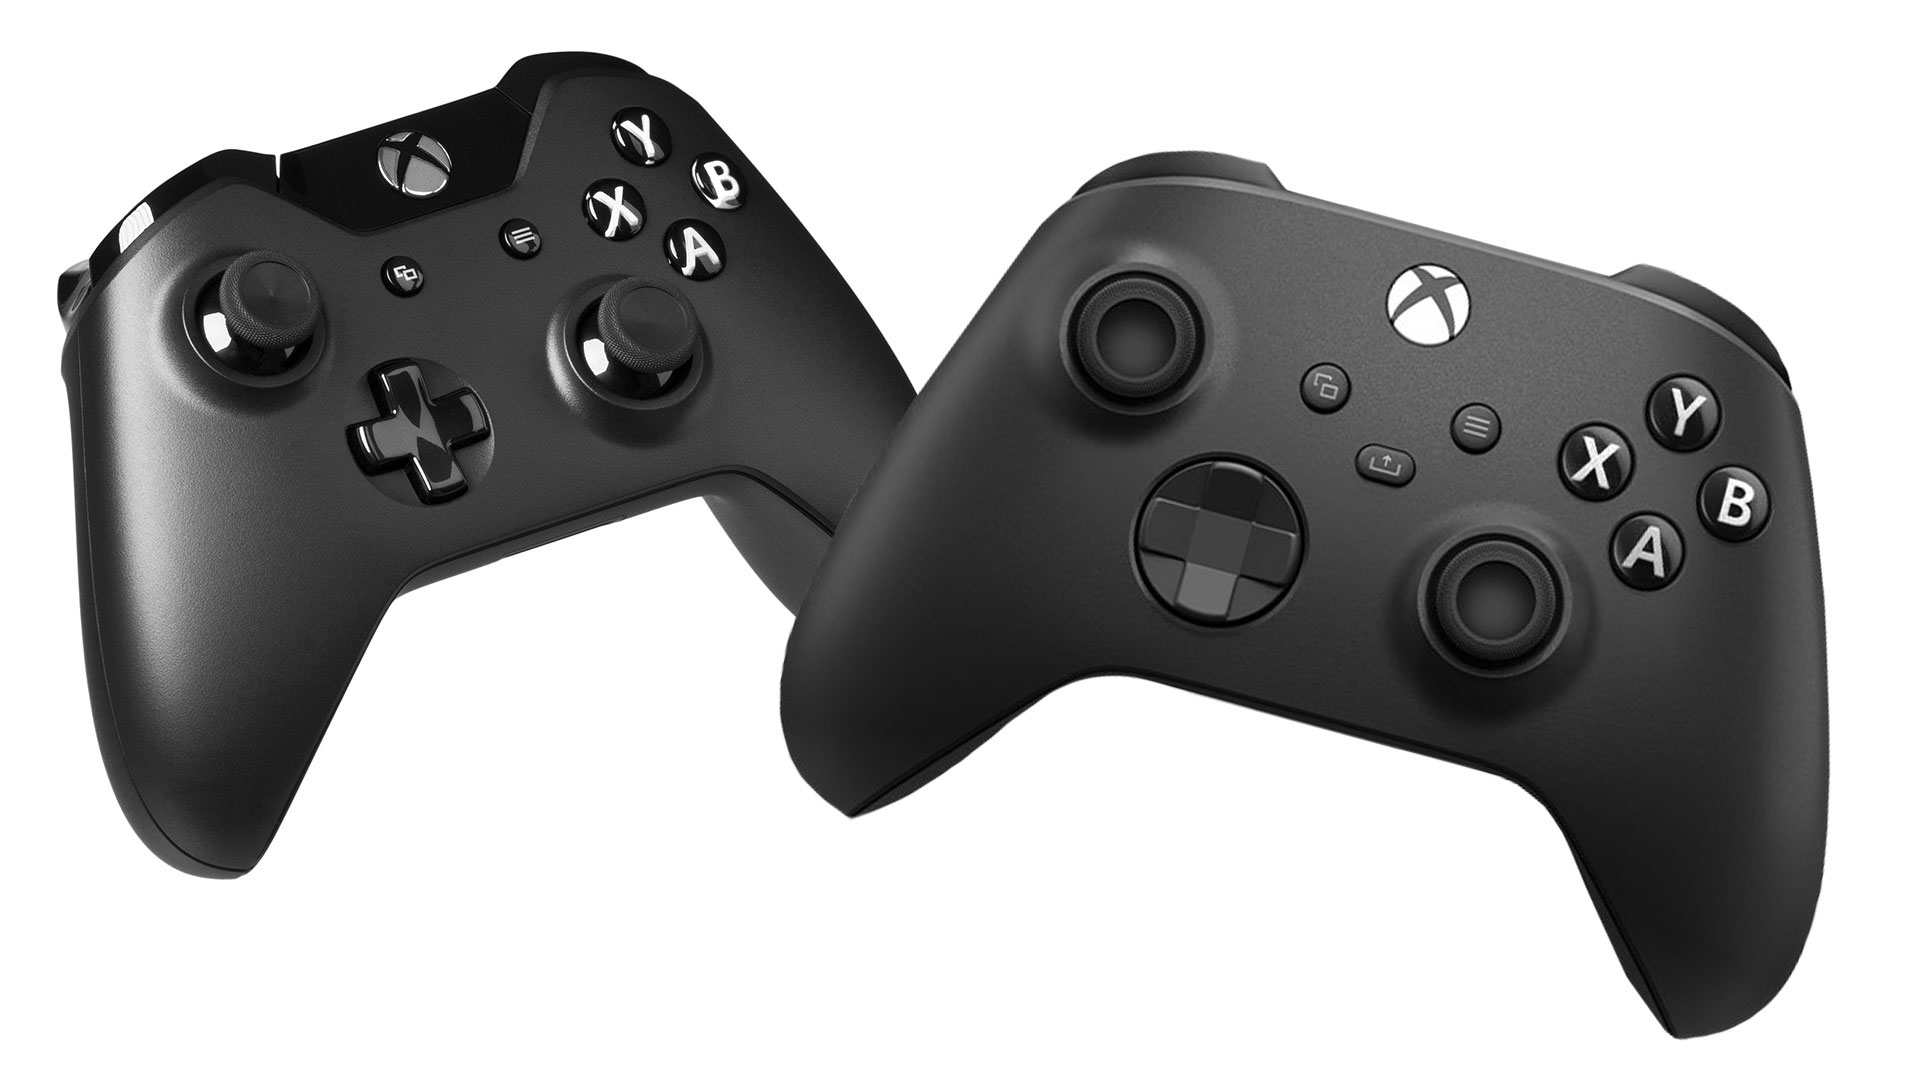 The new update for Xbox brings news for the controller